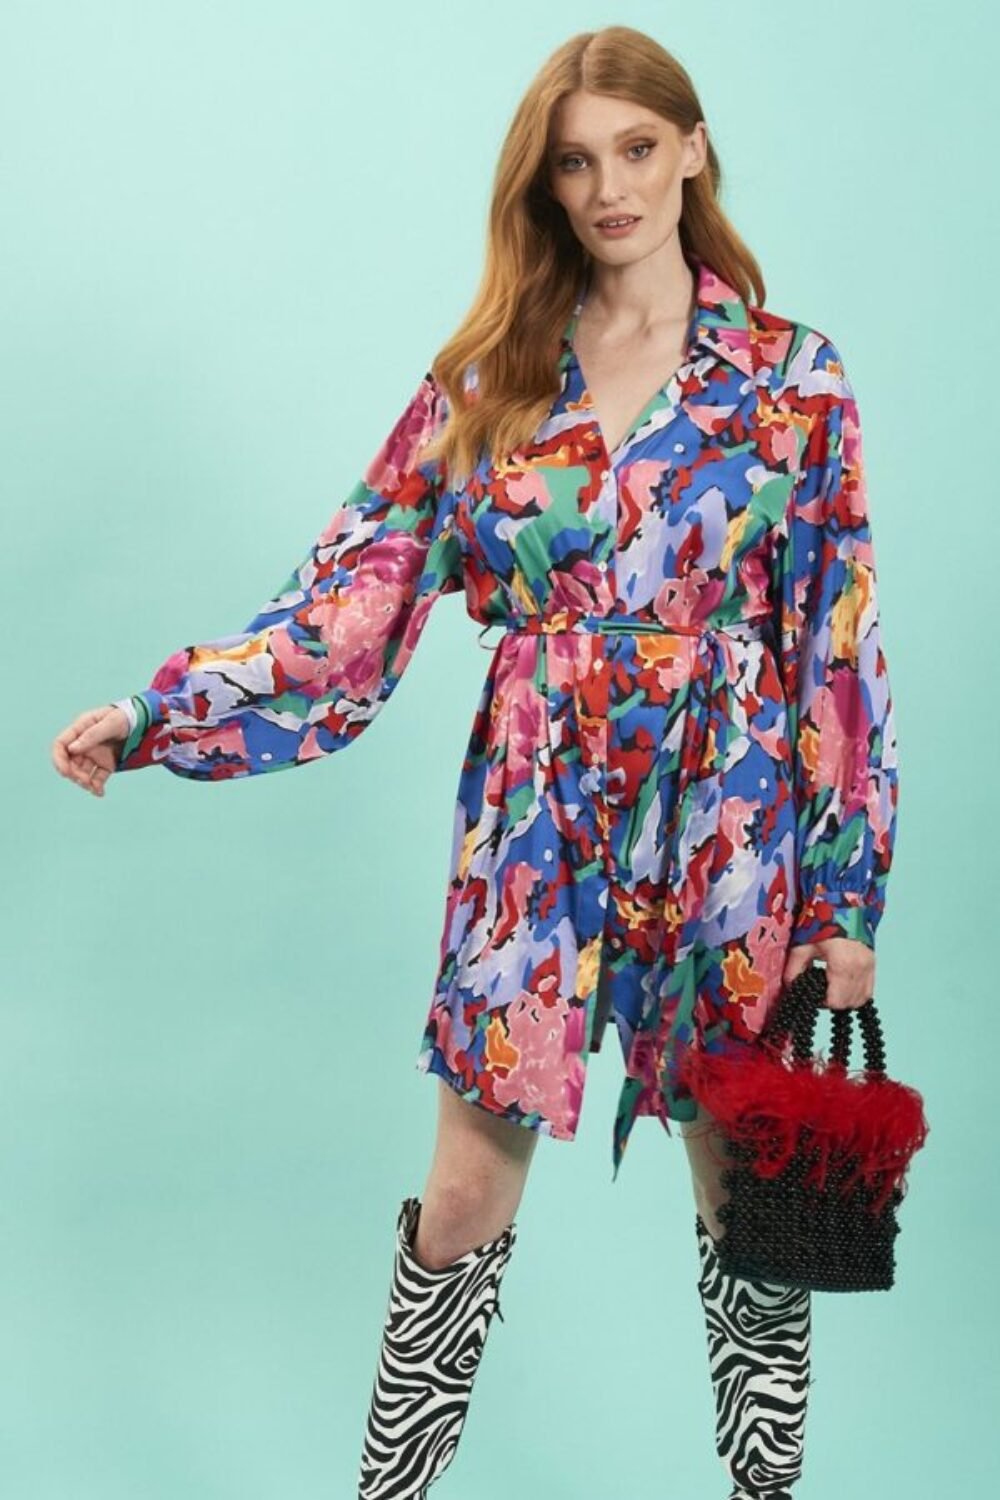 Shop Lux Floral Shirt Dress with Long Sleeves and Belt and women's luxury and designer clothes at www.lux-apparel.co.uk